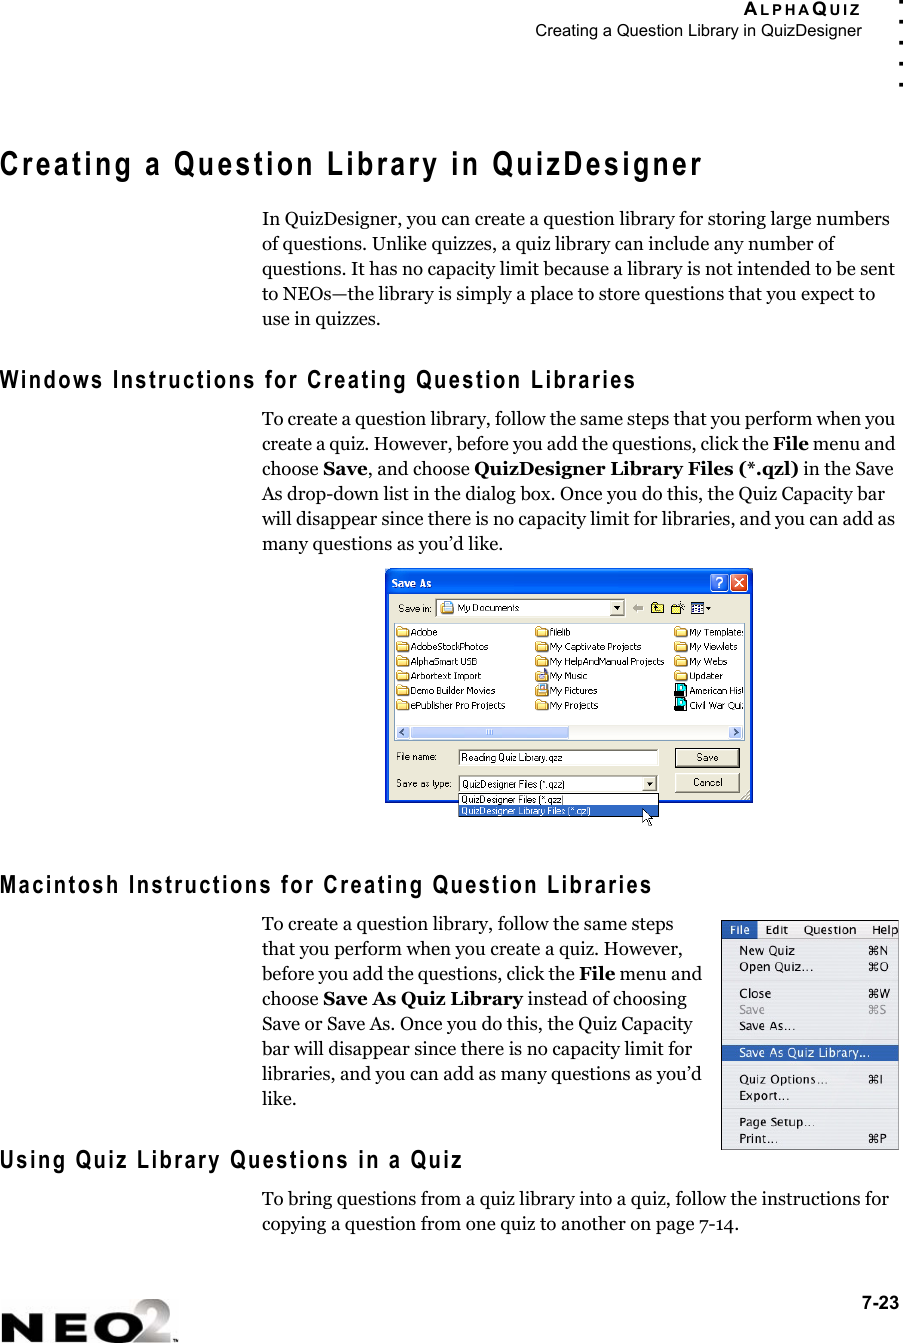 ALPHAQUIZCreating a Question Library in QuizDesigner7-23. . . . .Creating a Question Library in QuizDesignerIn QuizDesigner, you can create a question library for storing large numbers of questions. Unlike quizzes, a quiz library can include any number of questions. It has no capacity limit because a library is not intended to be sent to NEOs—the library is simply a place to store questions that you expect to use in quizzes.Windows Instructions for Creating Question LibrariesTo create a question library, follow the same steps that you perform when you create a quiz. However, before you add the questions, click the File menu and choose Save, and choose QuizDesigner Library Files (*.qzl) in the Save As drop-down list in the dialog box. Once you do this, the Quiz Capacity bar will disappear since there is no capacity limit for libraries, and you can add as many questions as you’d like.Macintosh Instructions for Creating Question LibrariesTo create a question library, follow the same steps that you perform when you create a quiz. However, before you add the questions, click the File menu and choose Save As Quiz Library instead of choosing Save or Save As. Once you do this, the Quiz Capacity bar will disappear since there is no capacity limit for libraries, and you can add as many questions as you’d like.Using Quiz Library Questions in a QuizTo bring questions from a quiz library into a quiz, follow the instructions for copying a question from one quiz to another on page 7-14.